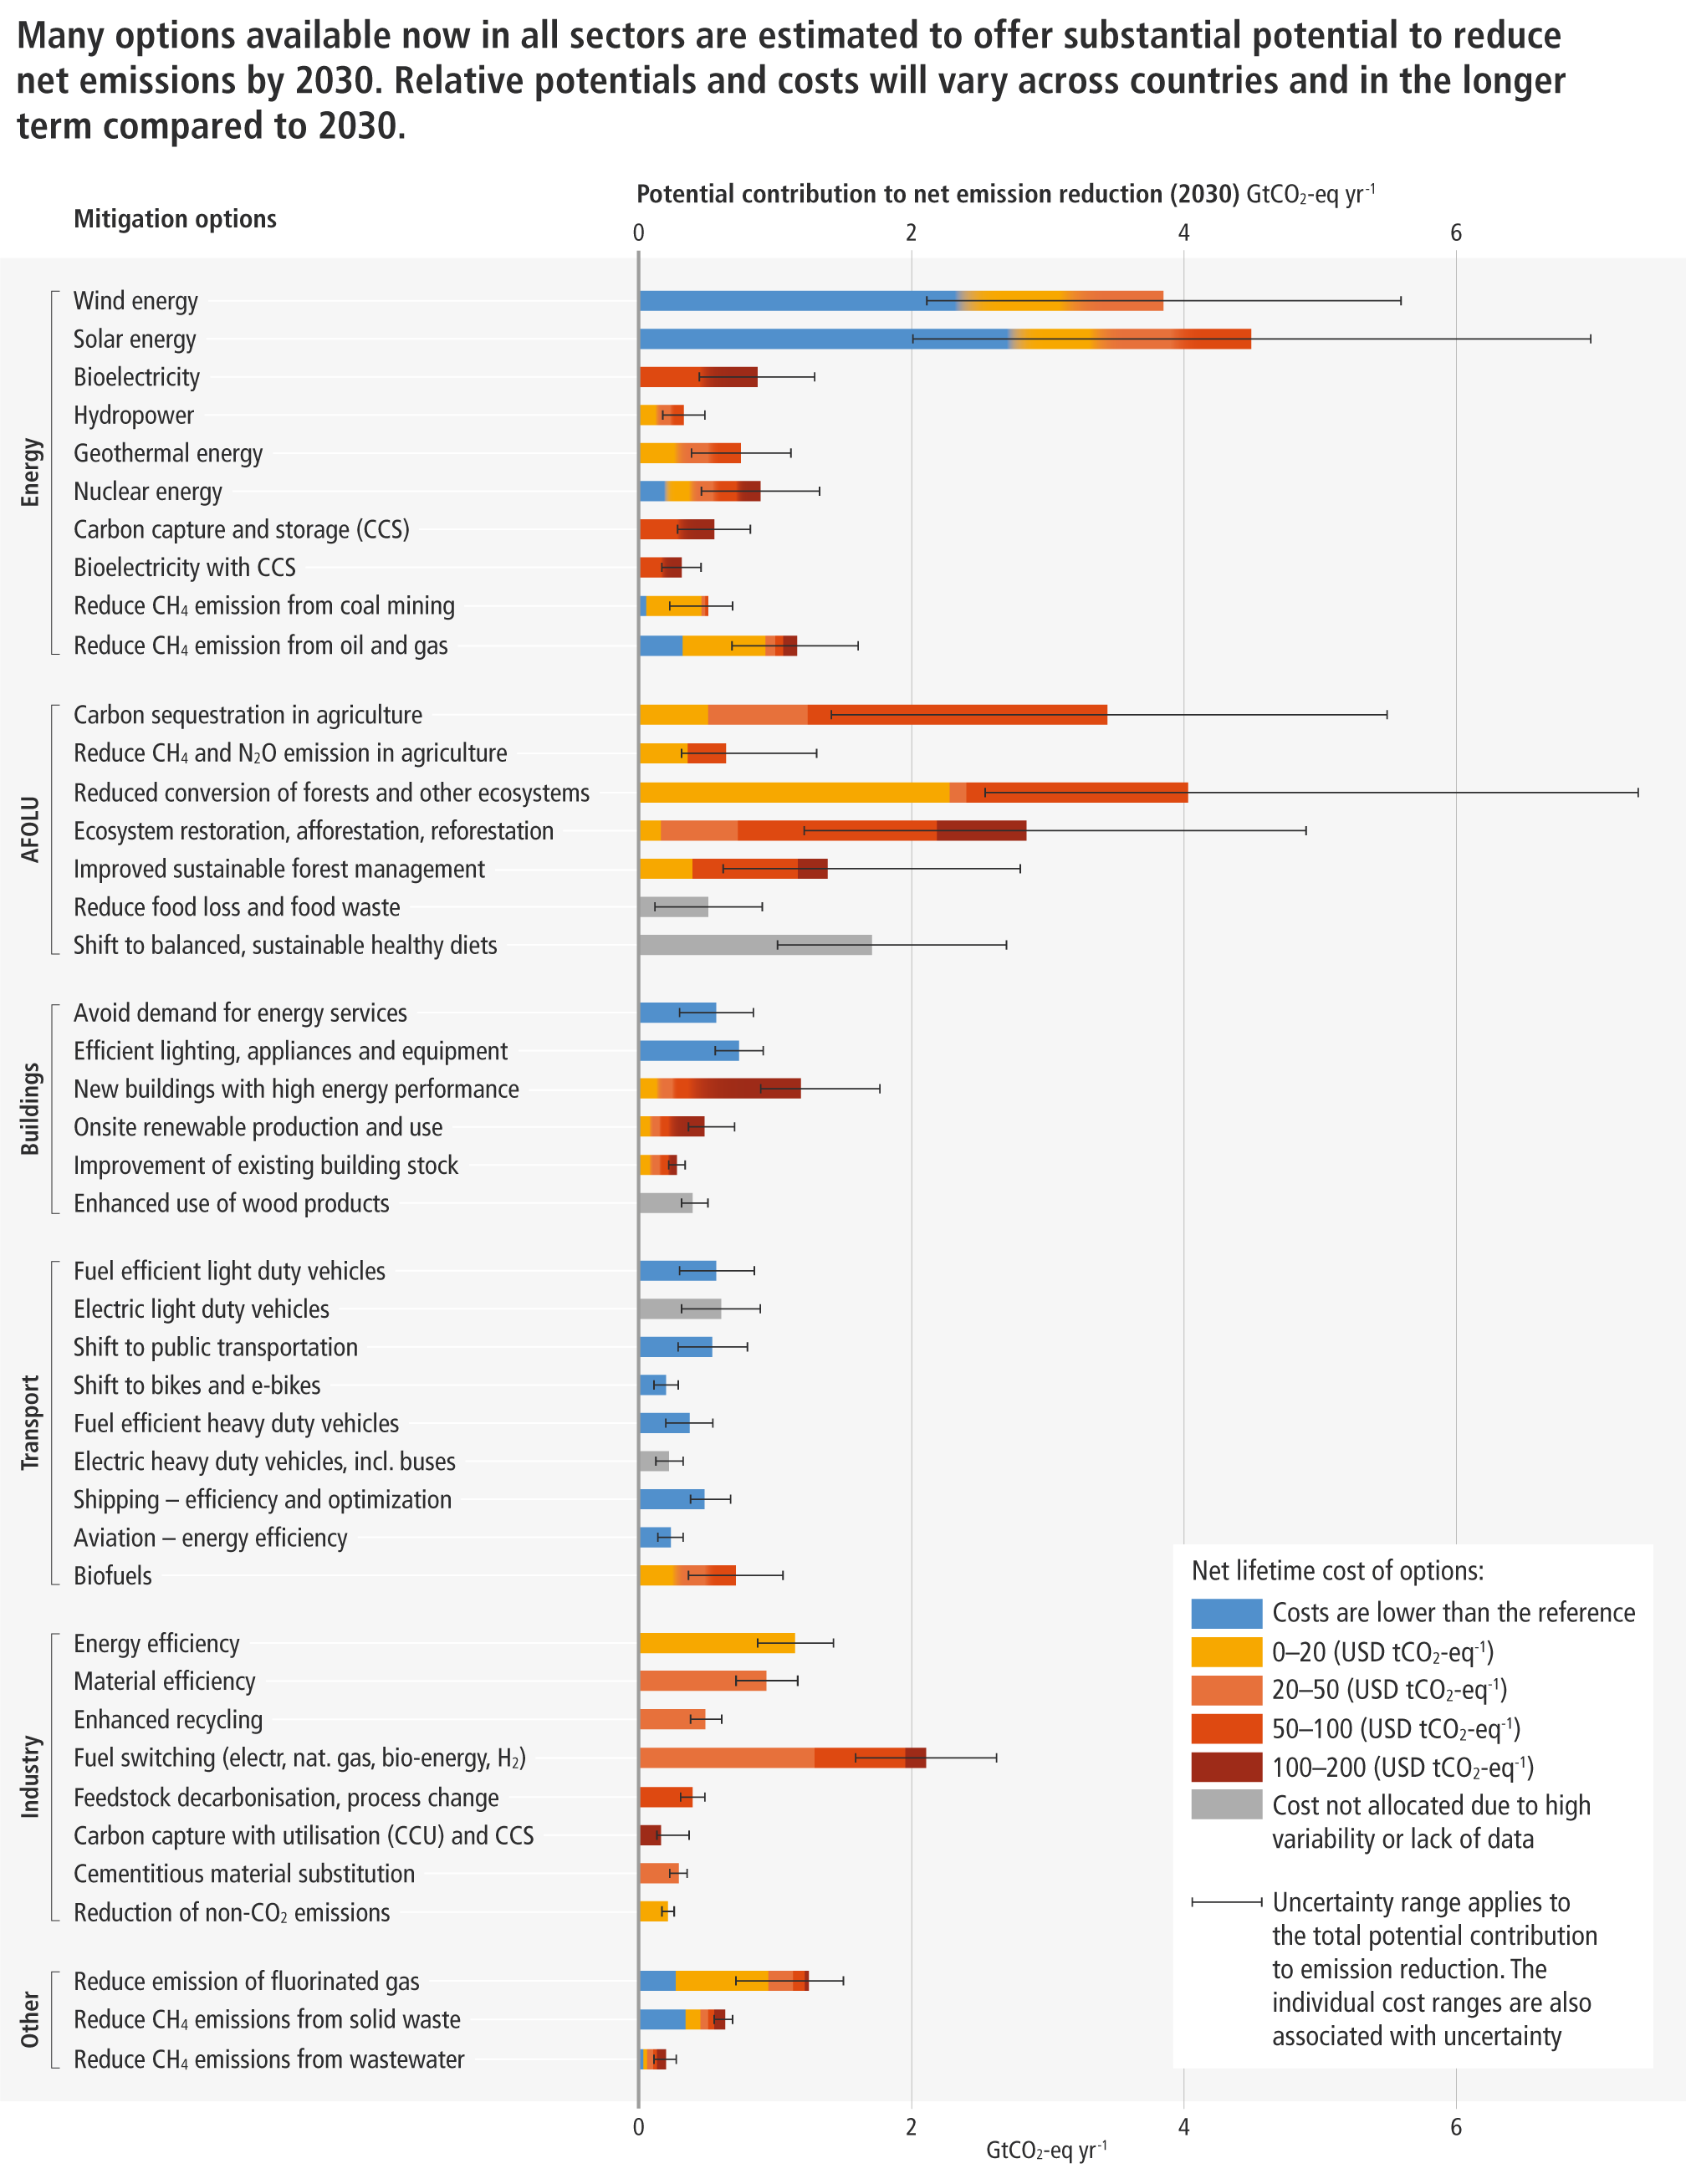 Overview of mitigation options and their estimated ranges of costs and potentials in 2030.